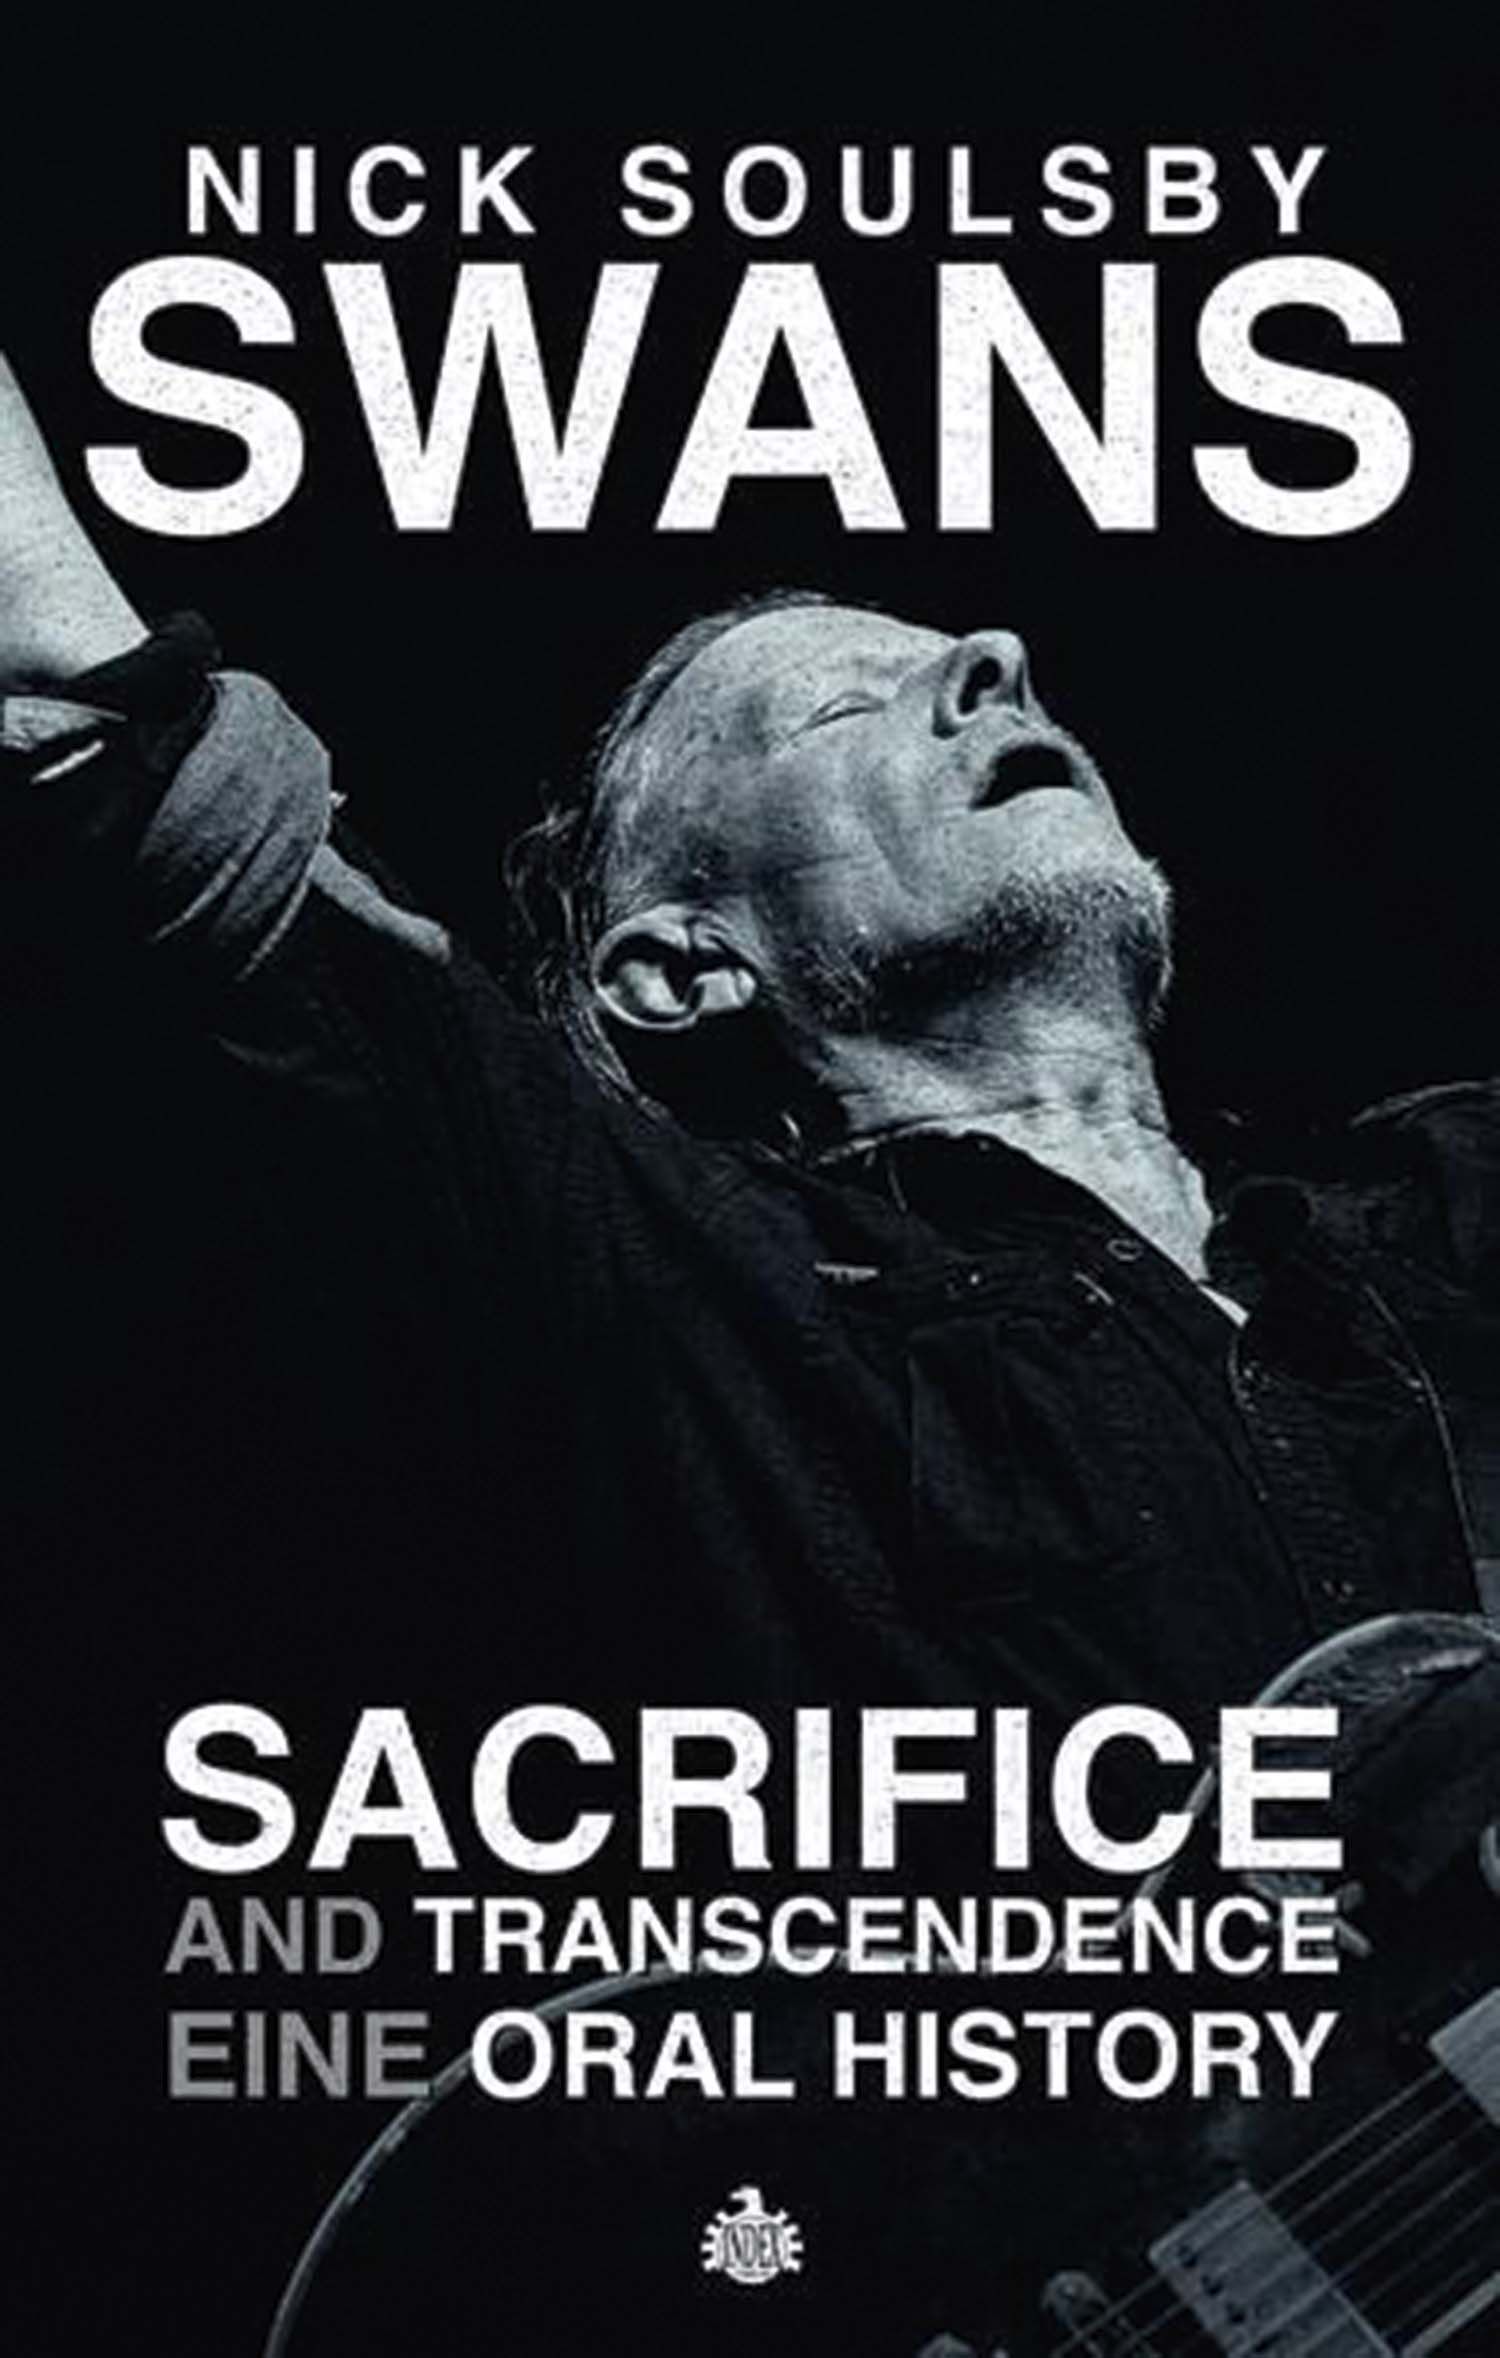 Swans - Sacrifice And Transcendence - Eine Oral Histroy